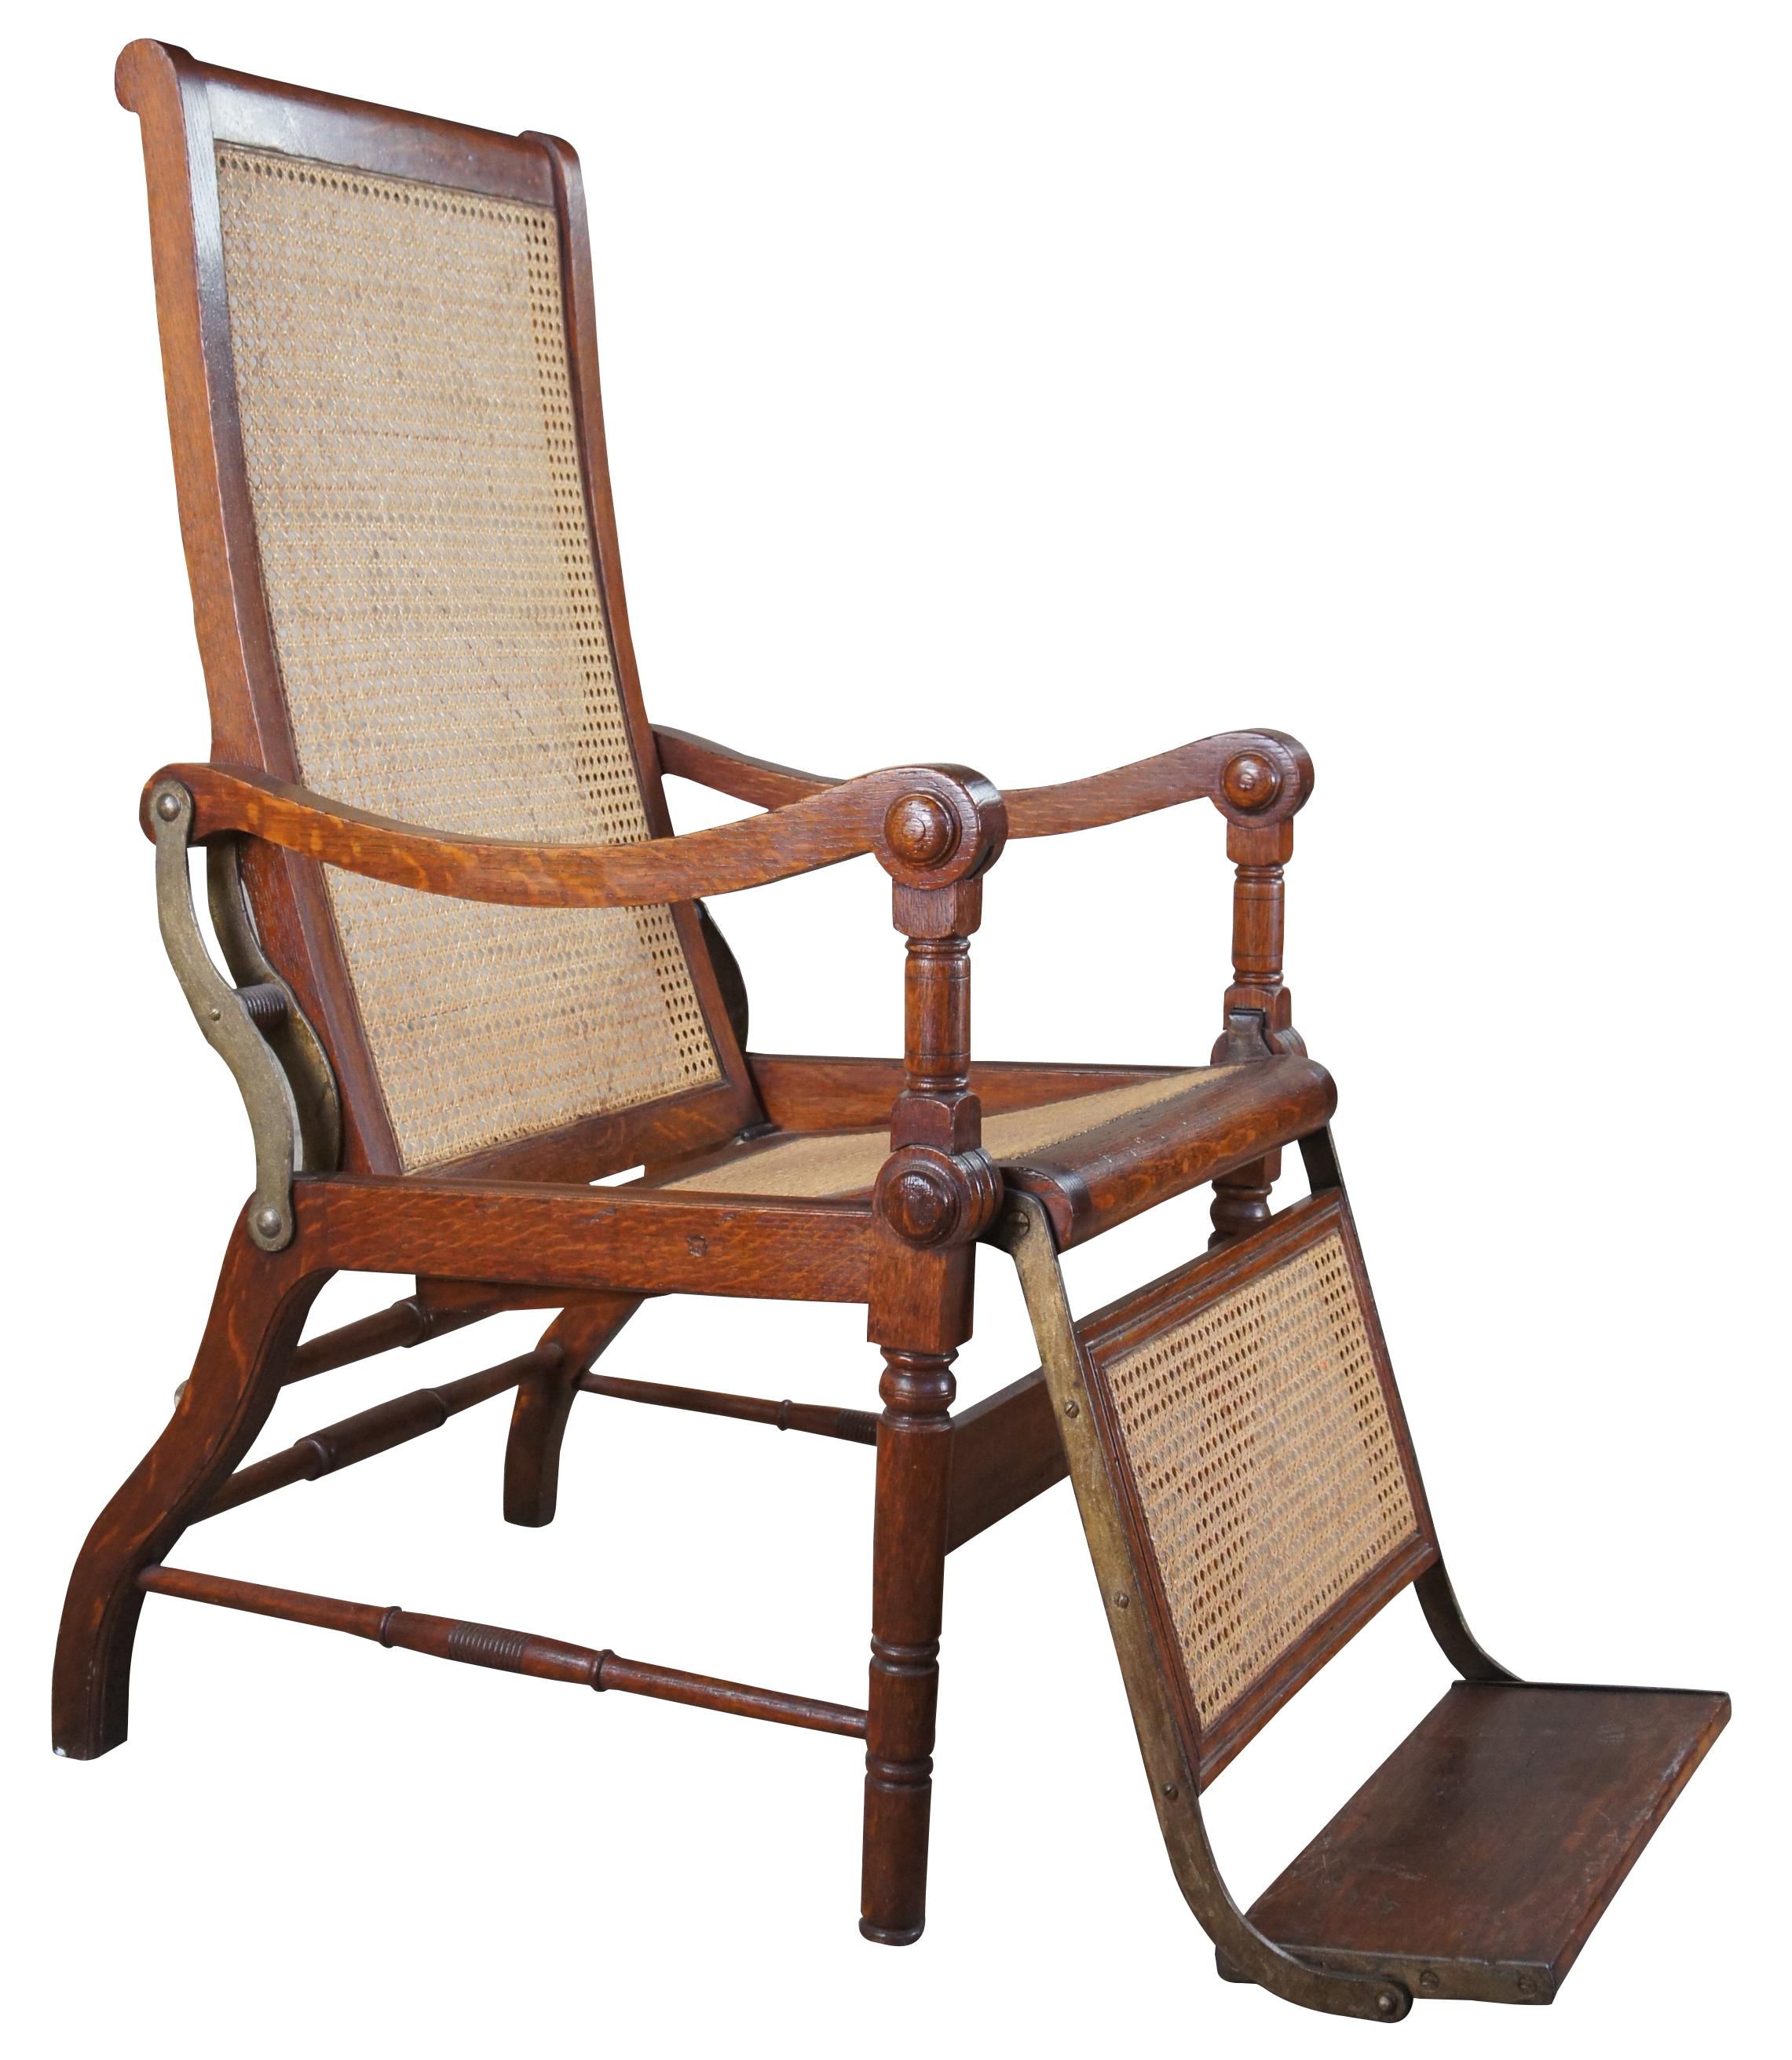 Englishman James Snell of London made the first mechanical dental chair with an adjustable seat and back for doctors to examine their patients more efficiently. This exquisite example is made from quartersawn oak with caned back and seat. Adjusts